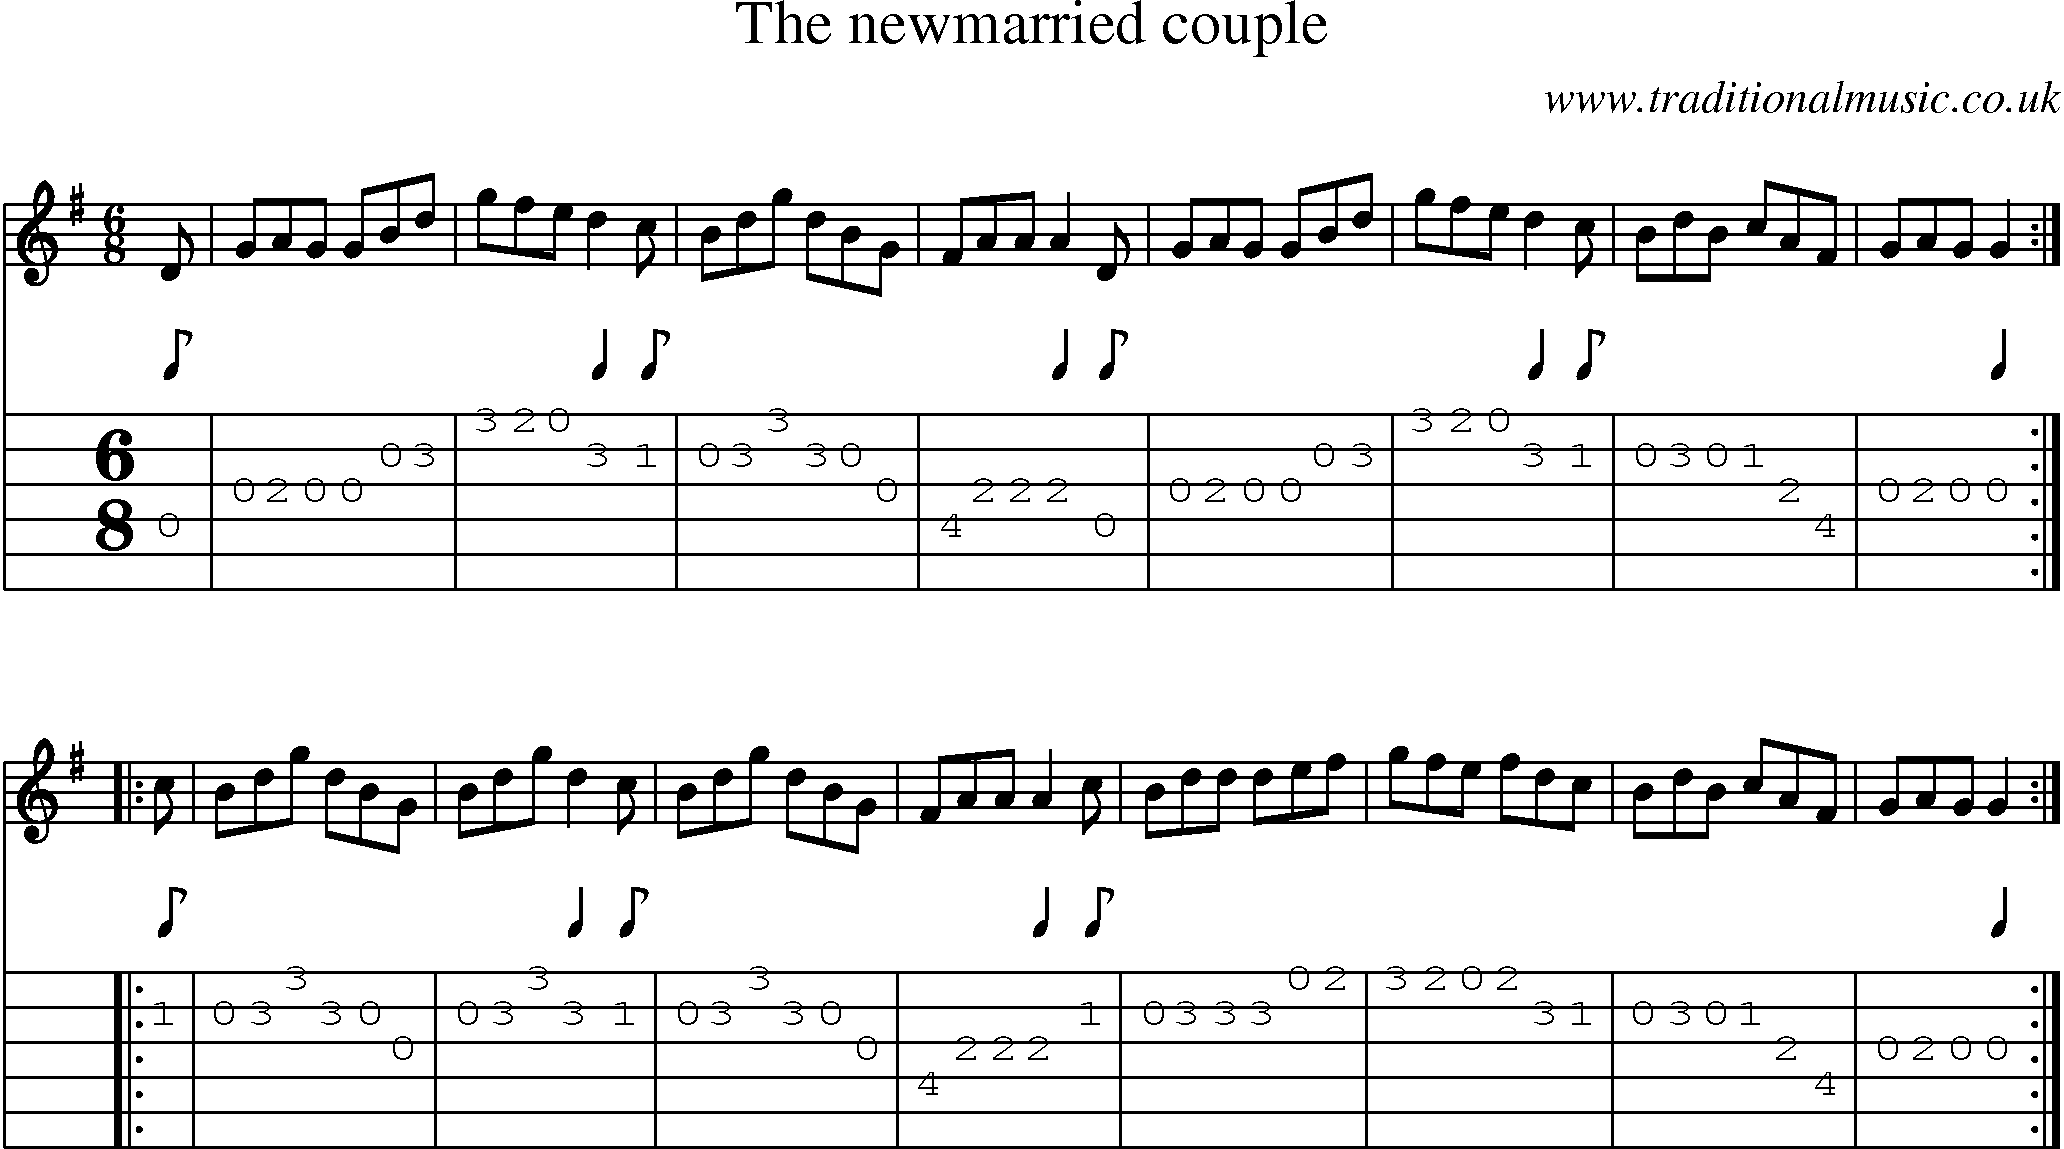 Music Score and Guitar Tabs for Newmarried Couple